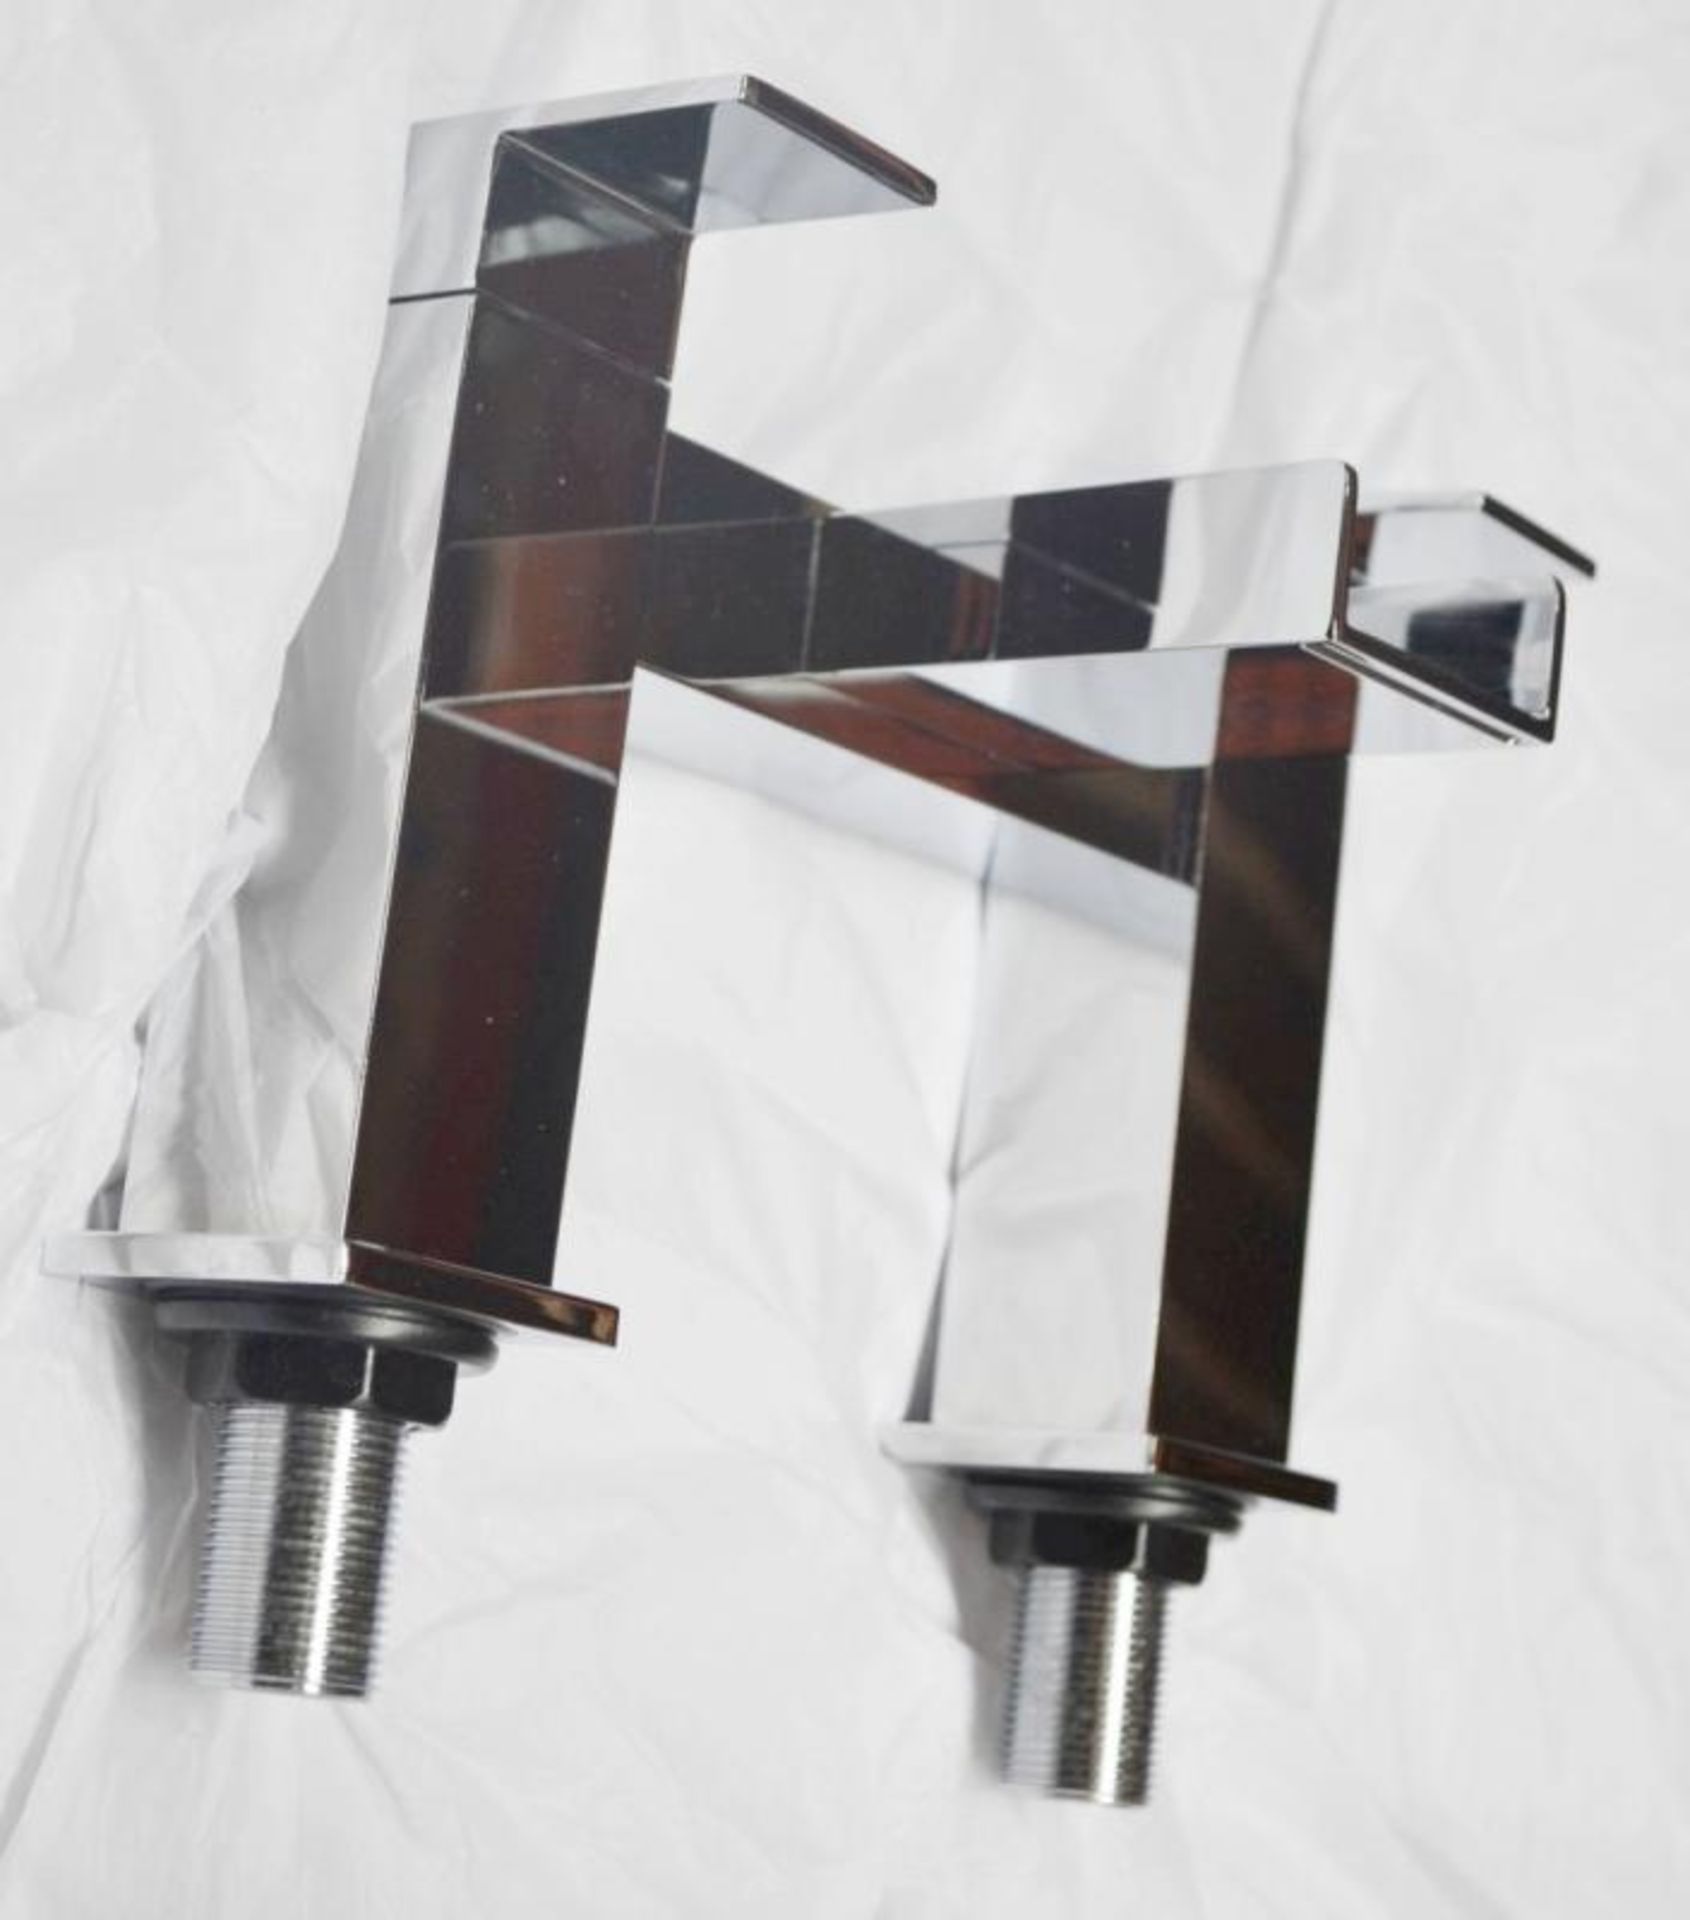 1 x Waterfall Bath Mixer Tap - Chrome Finish - Ref: M177 - CL190 - Unused Boxed Stock - Location: A - Image 3 of 4